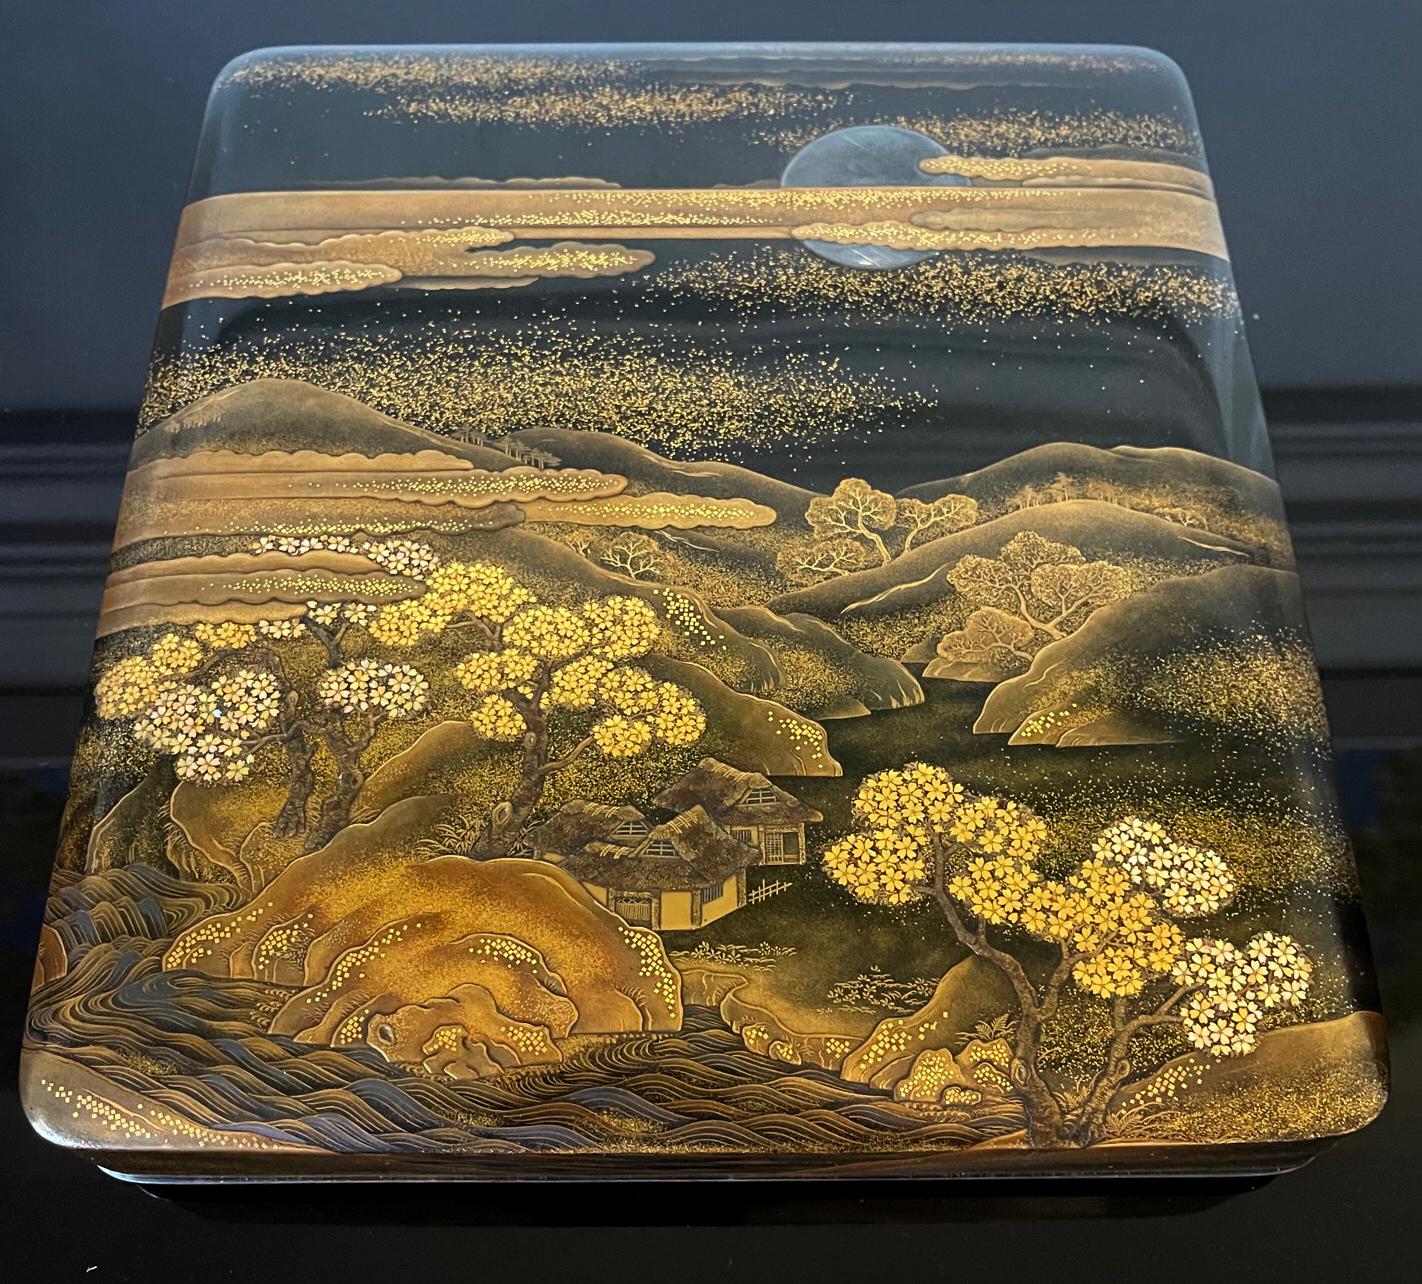 A very fine Japanese Maki-e Suzuribako (inkstone box) with a complete set of seven writing implement circa early to mid-19th century (late Edo period). The dark roiro color case showcases an ambient nocturnal landscape in and around Mount Fuji.